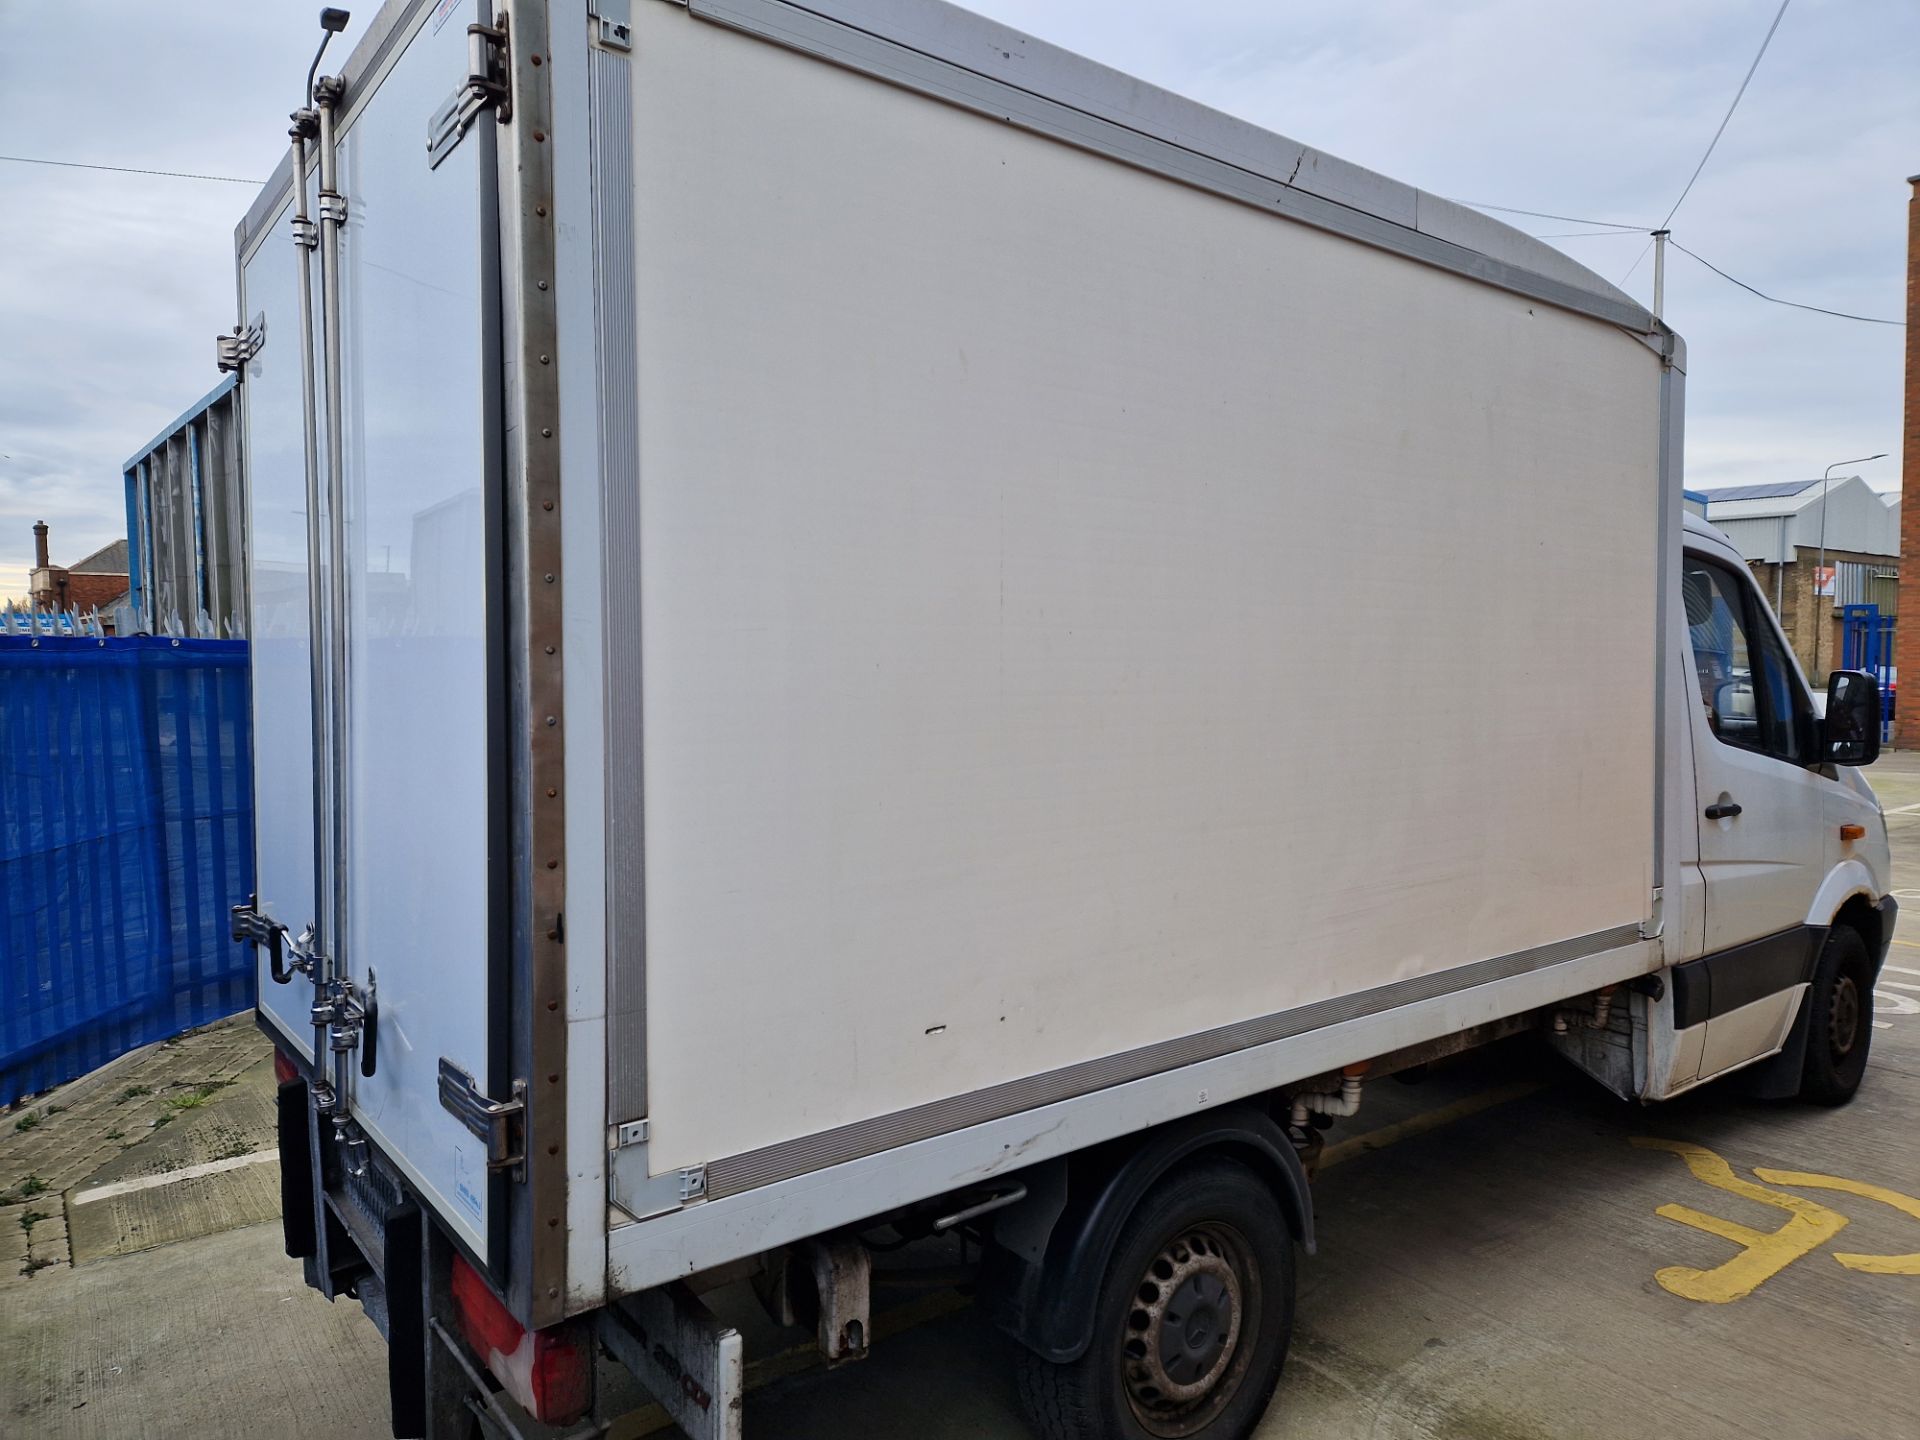 Mercedes Benz Sprinter 313 CDi Refrigerated Box Van, registration no. PO13 ULY, date first - Image 6 of 8